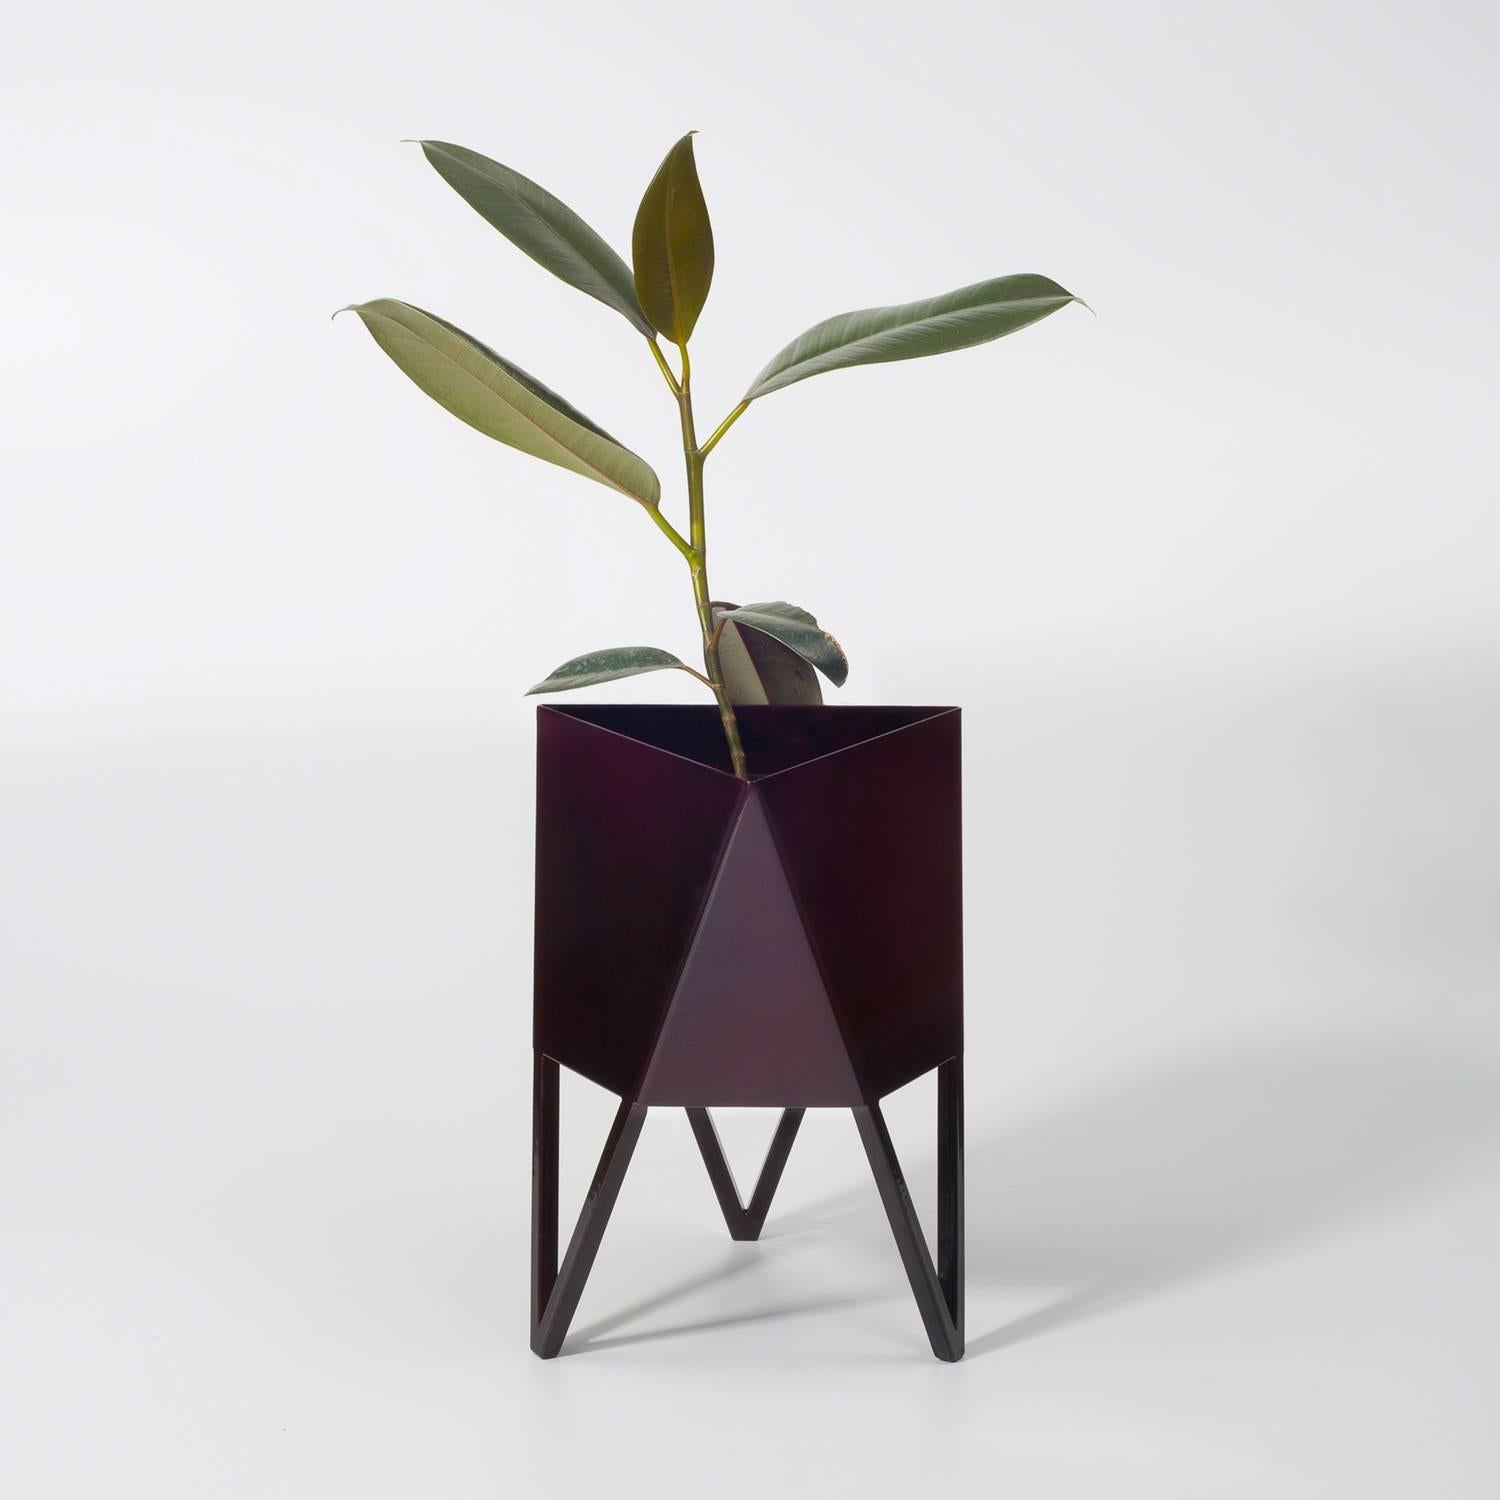 Contemporary Deca Planter in Pastel Green Steel, Large, by Force/Collide